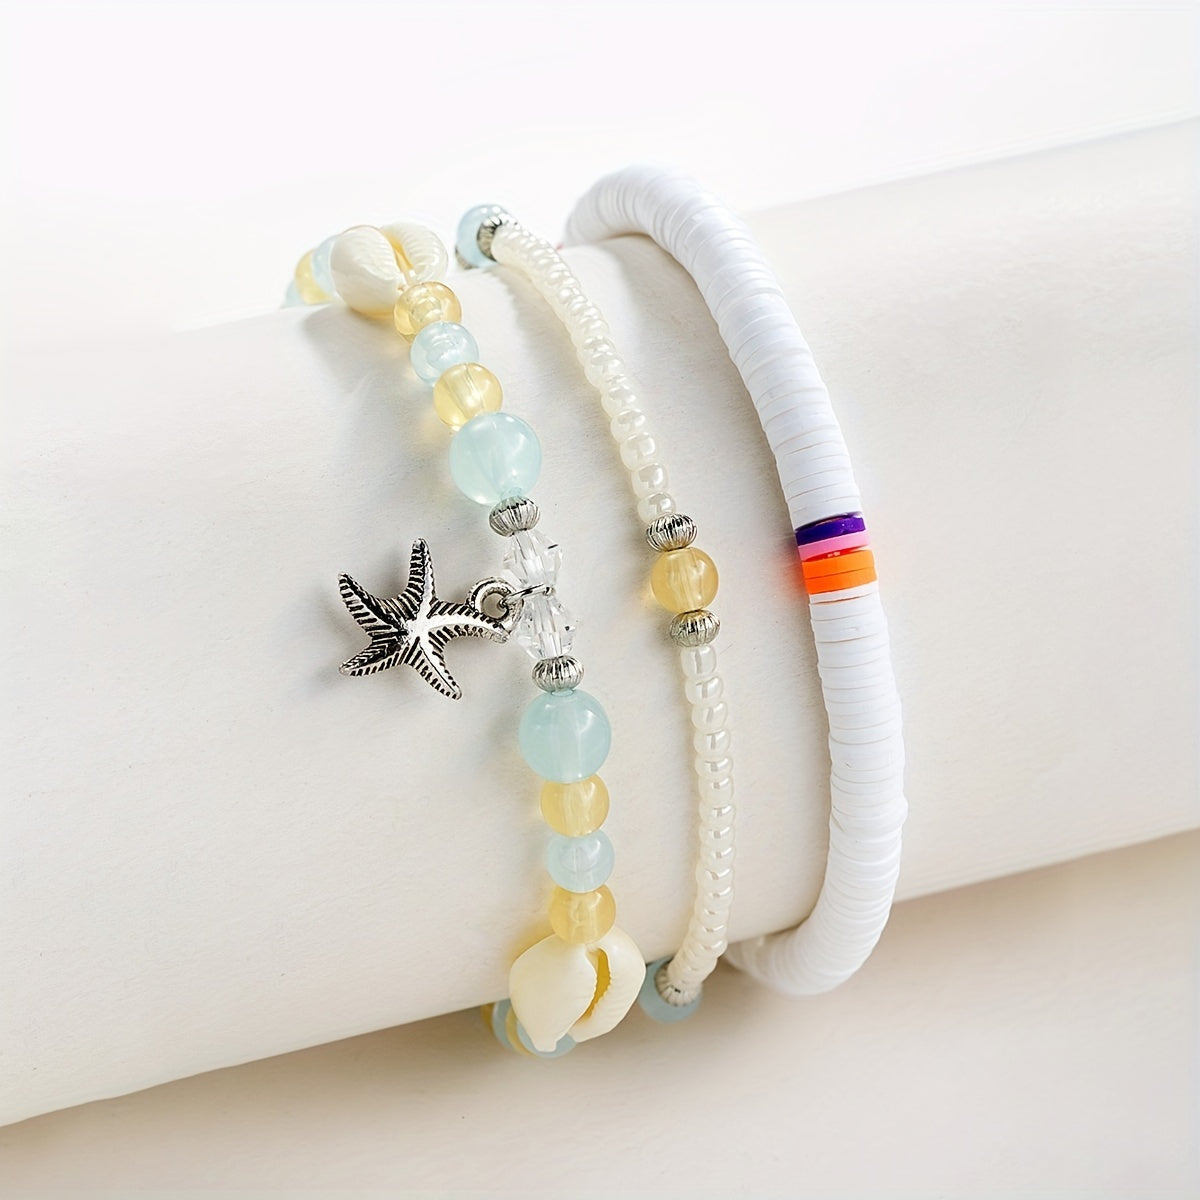 3pcs Starfish Shape Pendant Seed Beads Beaded Anklet Set With White Clay Beads Stackable Ankle Bracelet Set